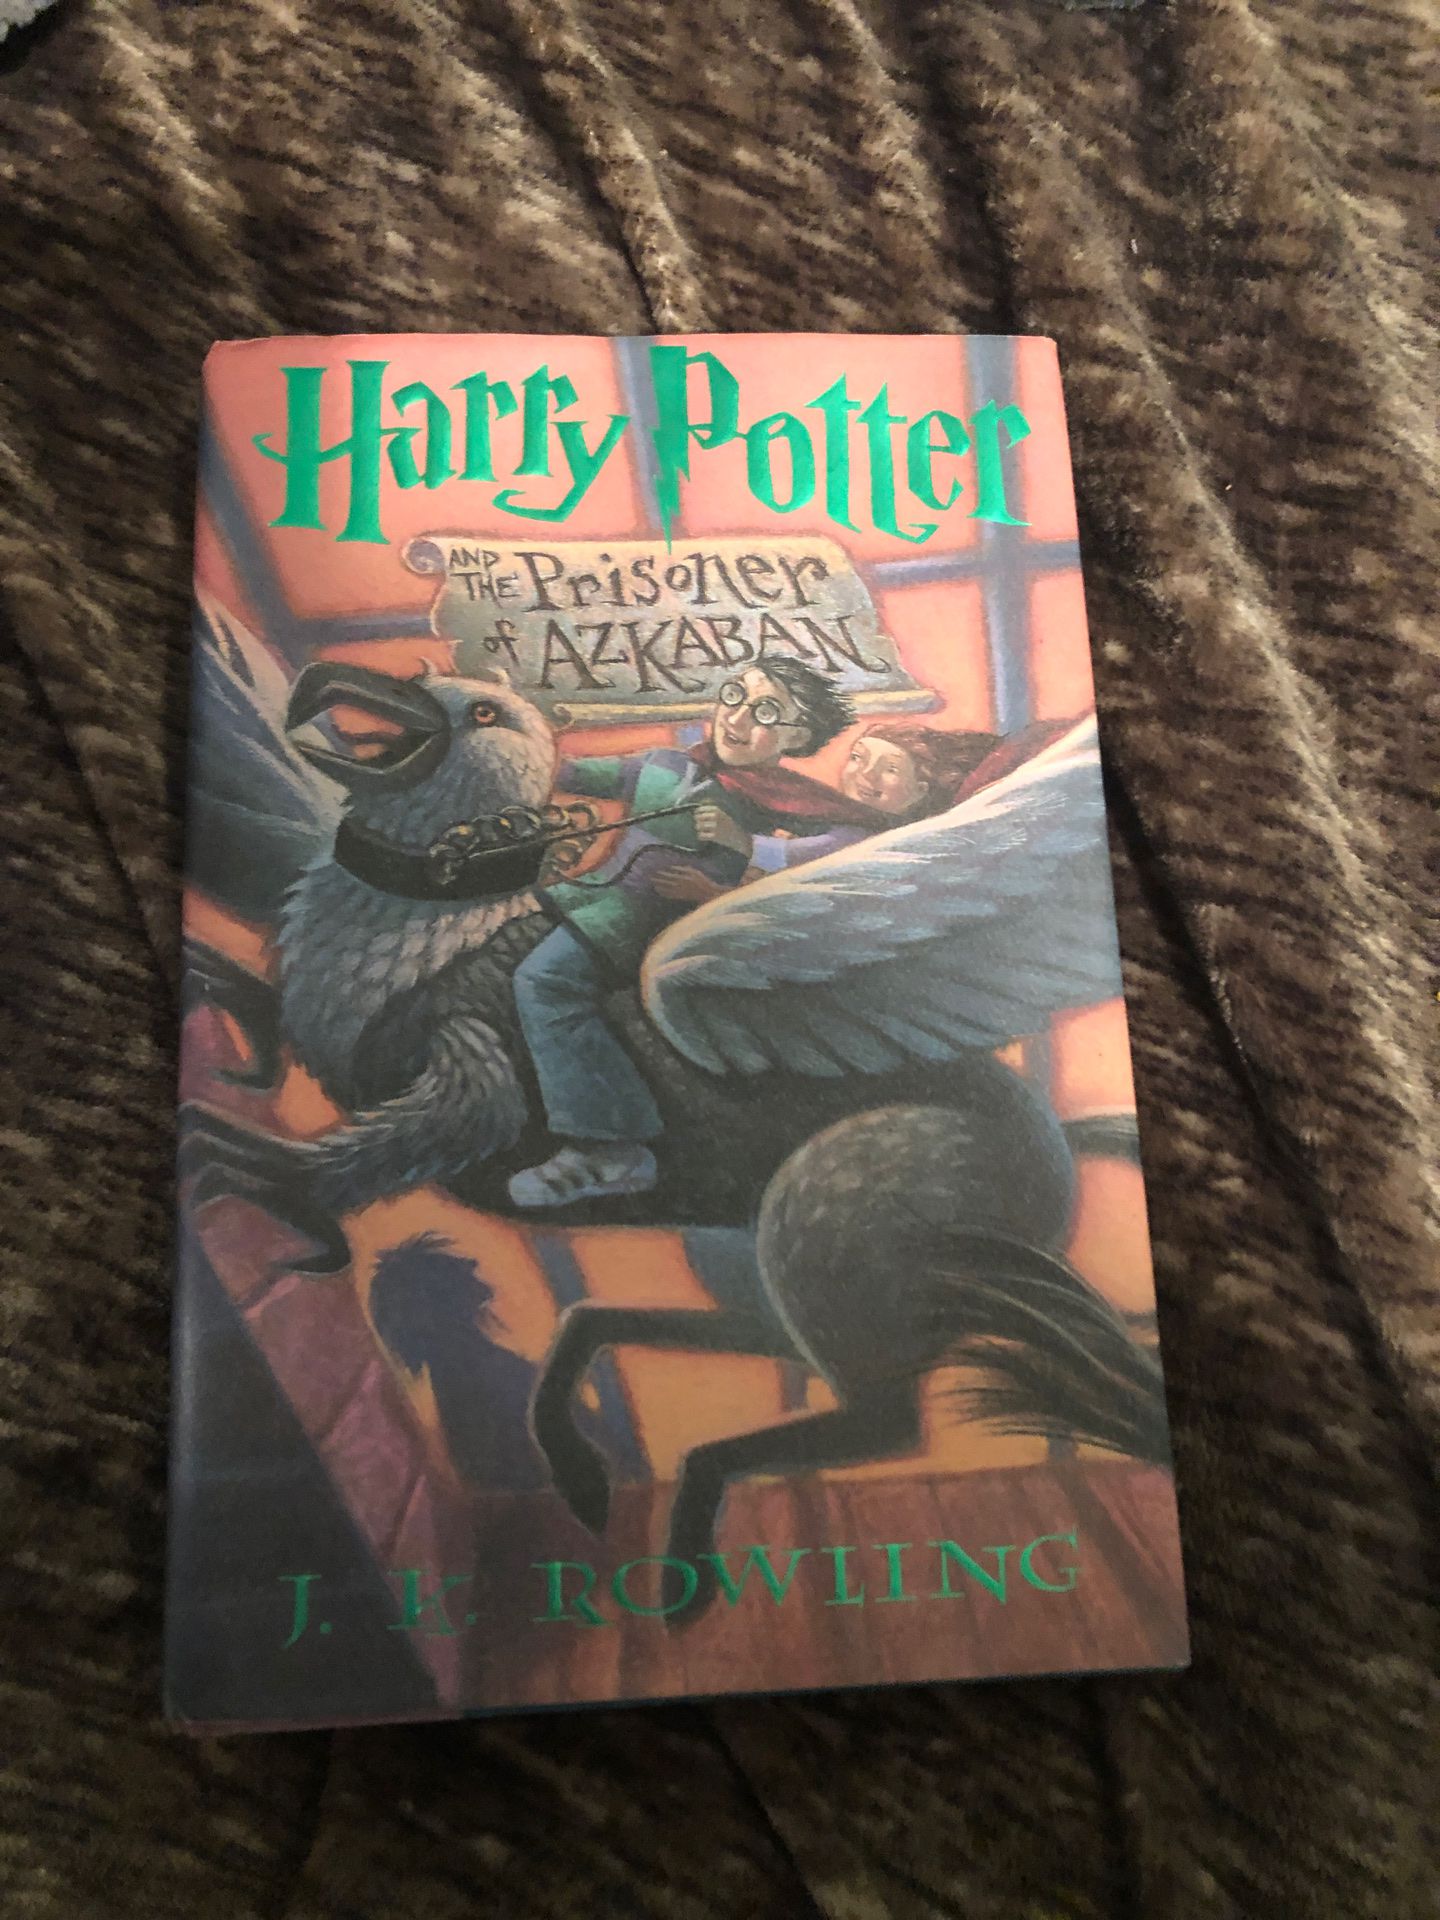 Hard cover Harry Potter book